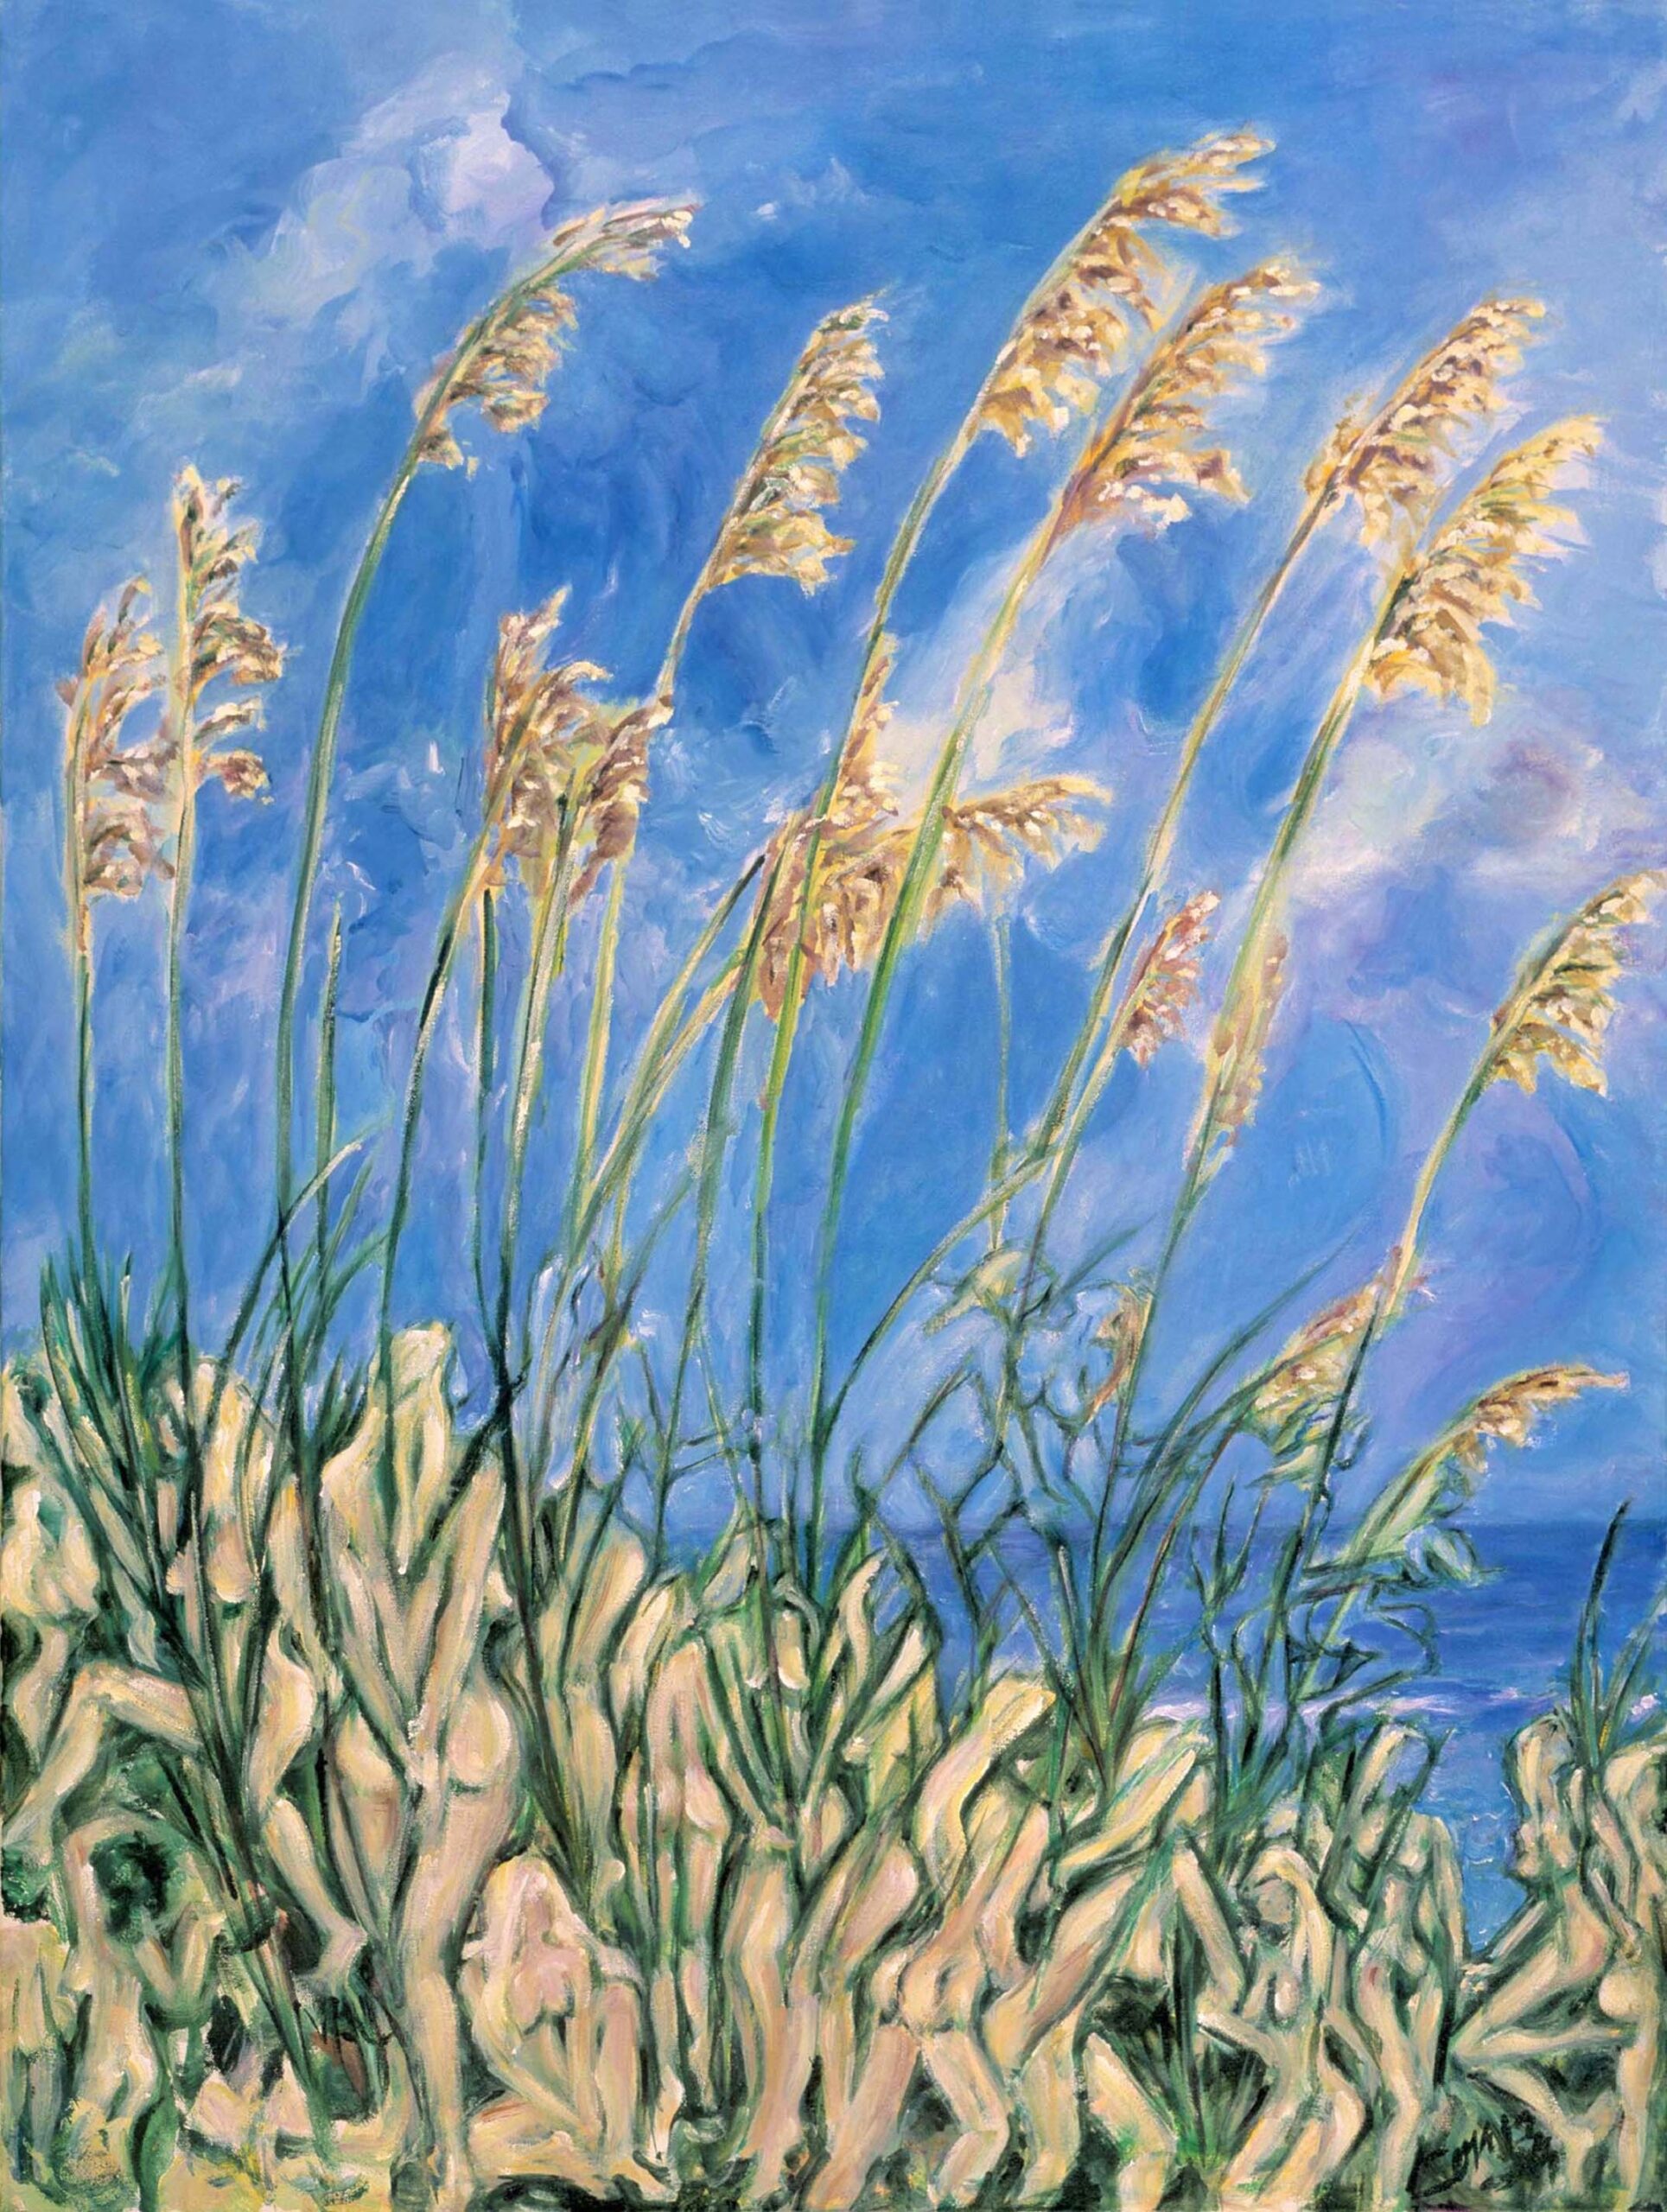 Sea oats reveal themselves in natural beauty and splendor shimmering in glistening summer sun.  They captivate attention, yet dancing 'beyond the dunes', Elementals of sea oats sway gracefully with Devas wafting in the summer sky. 

    
Available as Custom Reproduction
SELECT TITLE TO VIEW IMAGE